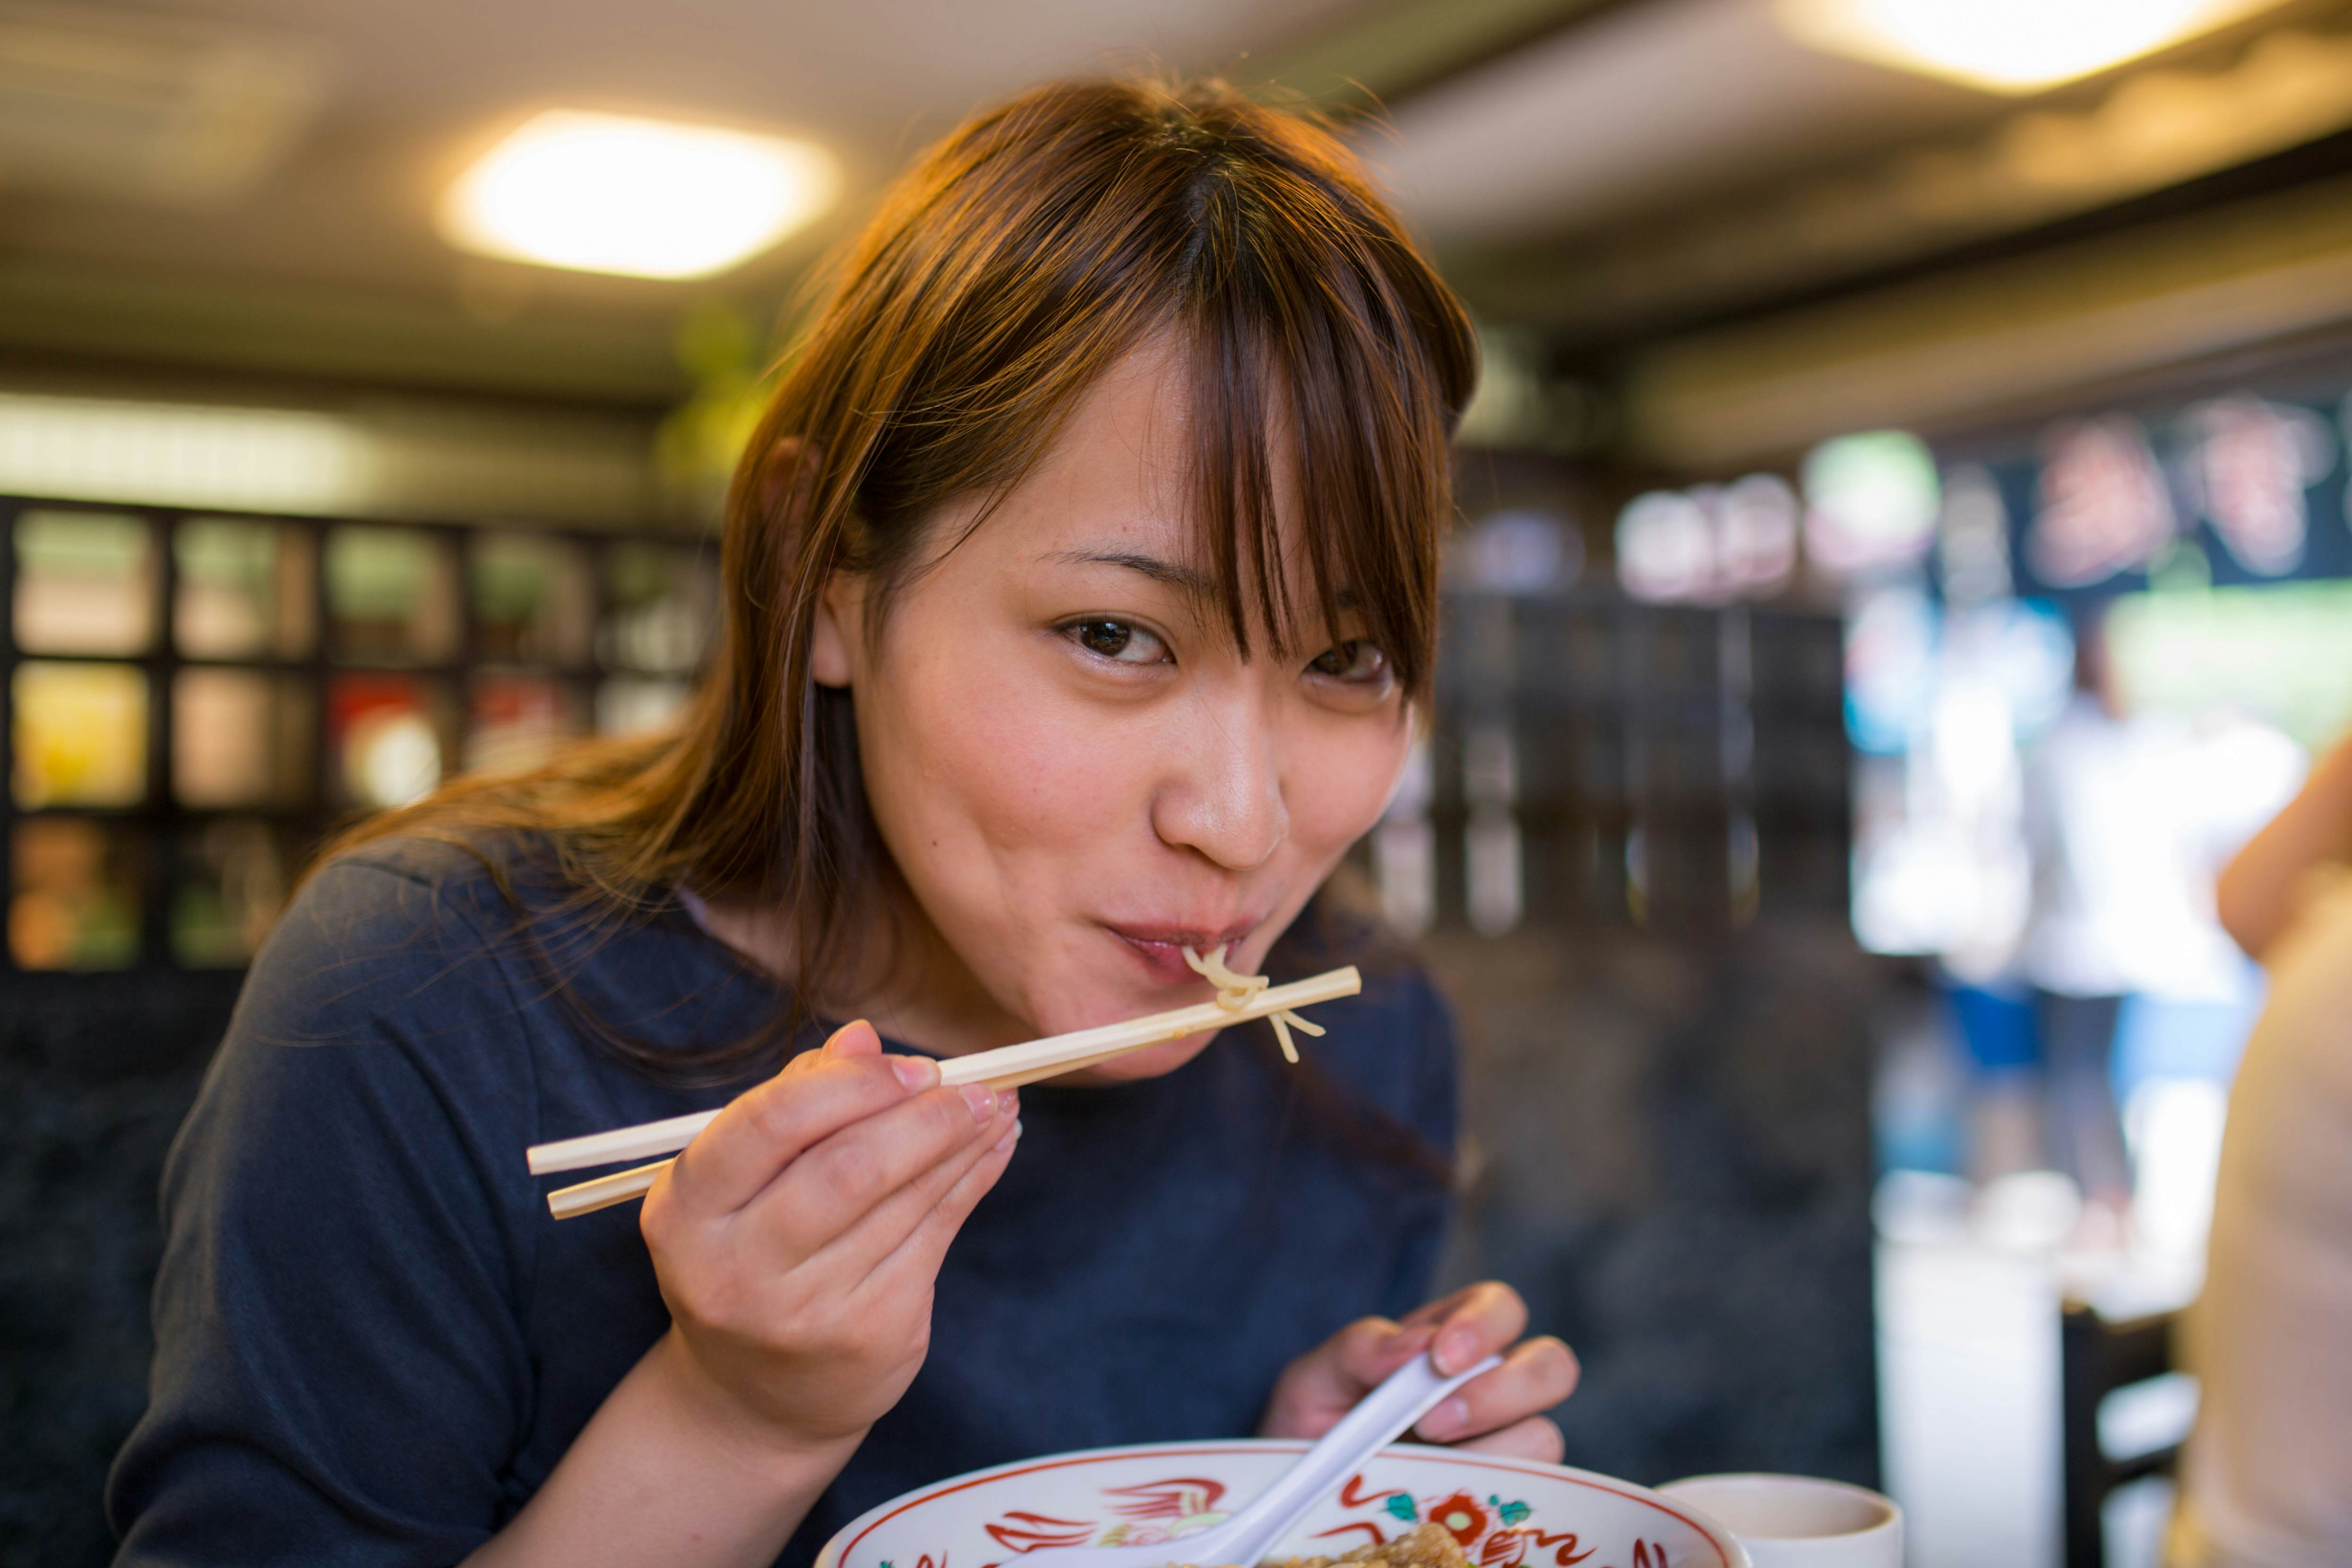 The 6 must-eat foods in Japanese airports - International Traveller